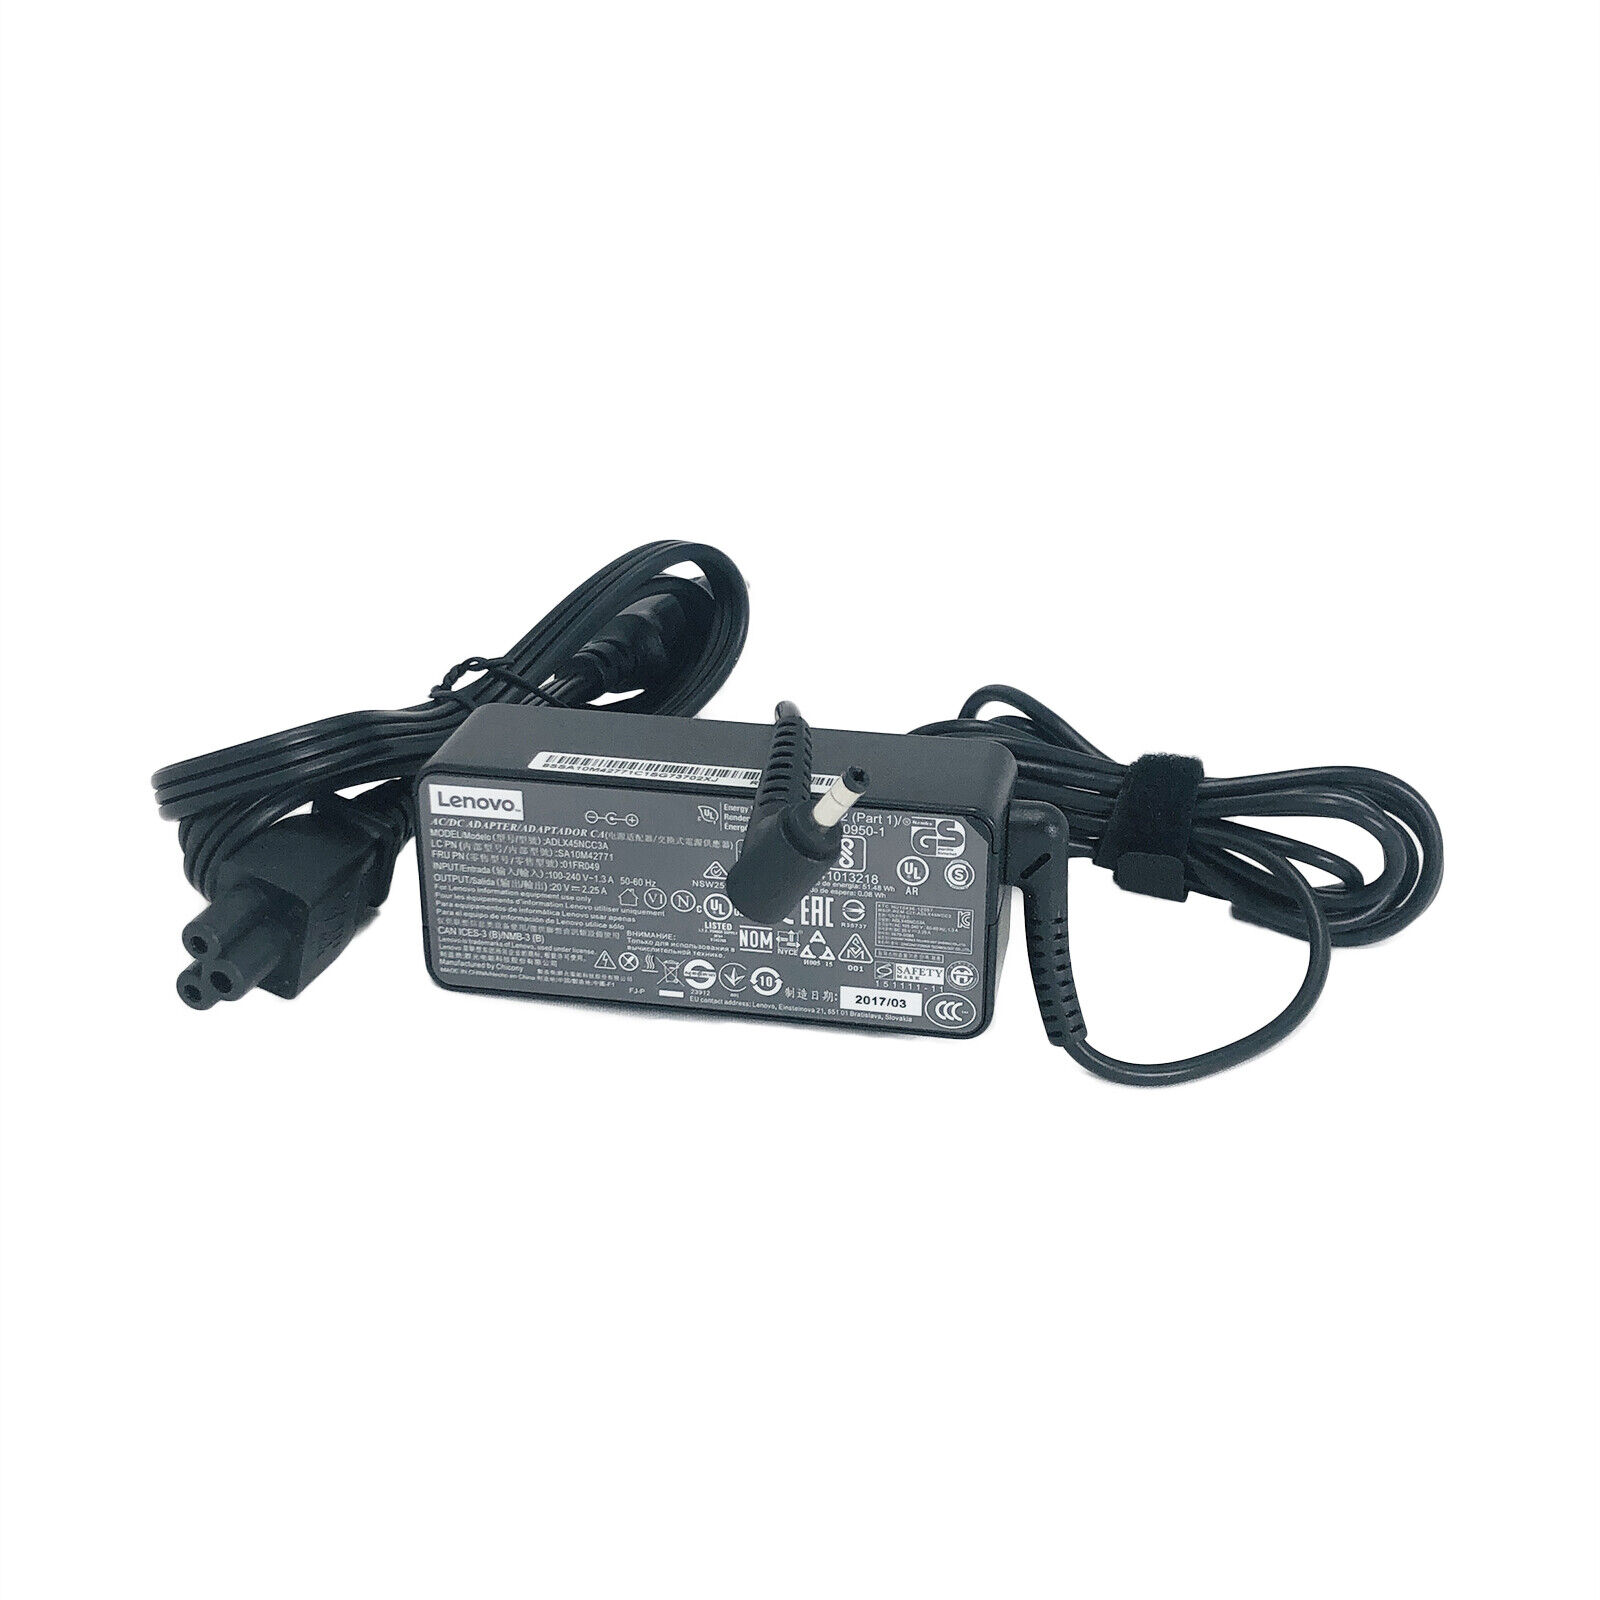 New Genuine Lenovo AC/DC Adapter for Laptop IdeaPad 300 320 330 w/PC